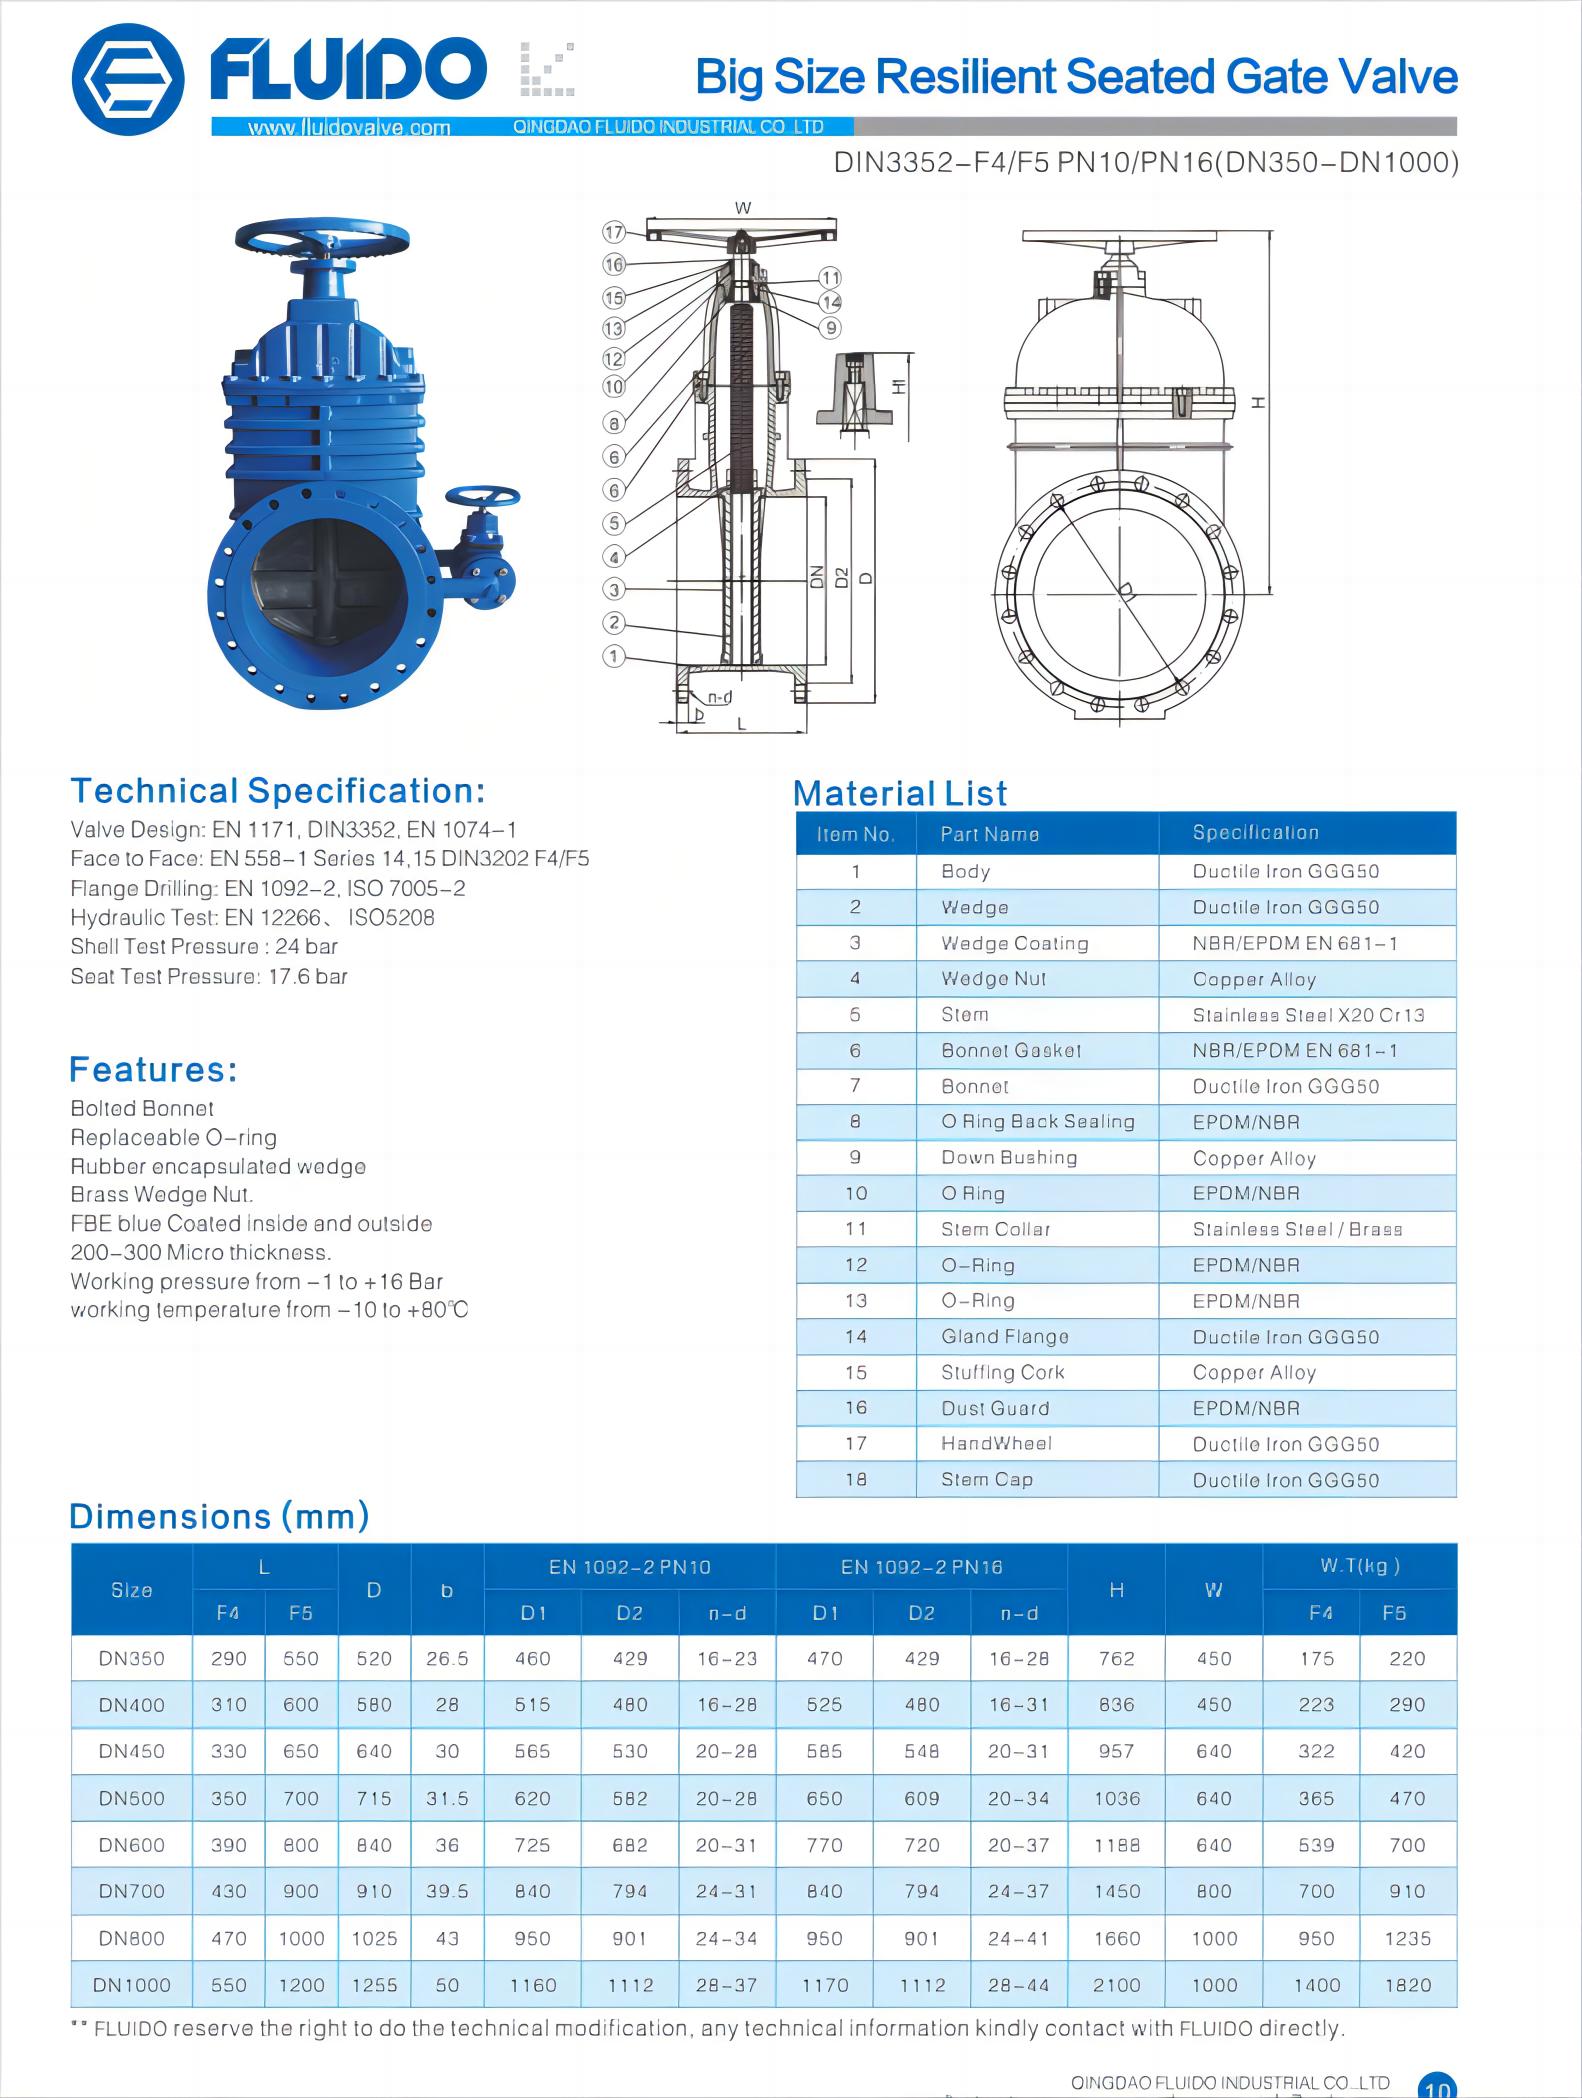 DN1000 Big Size Resilient Seated Gate valve